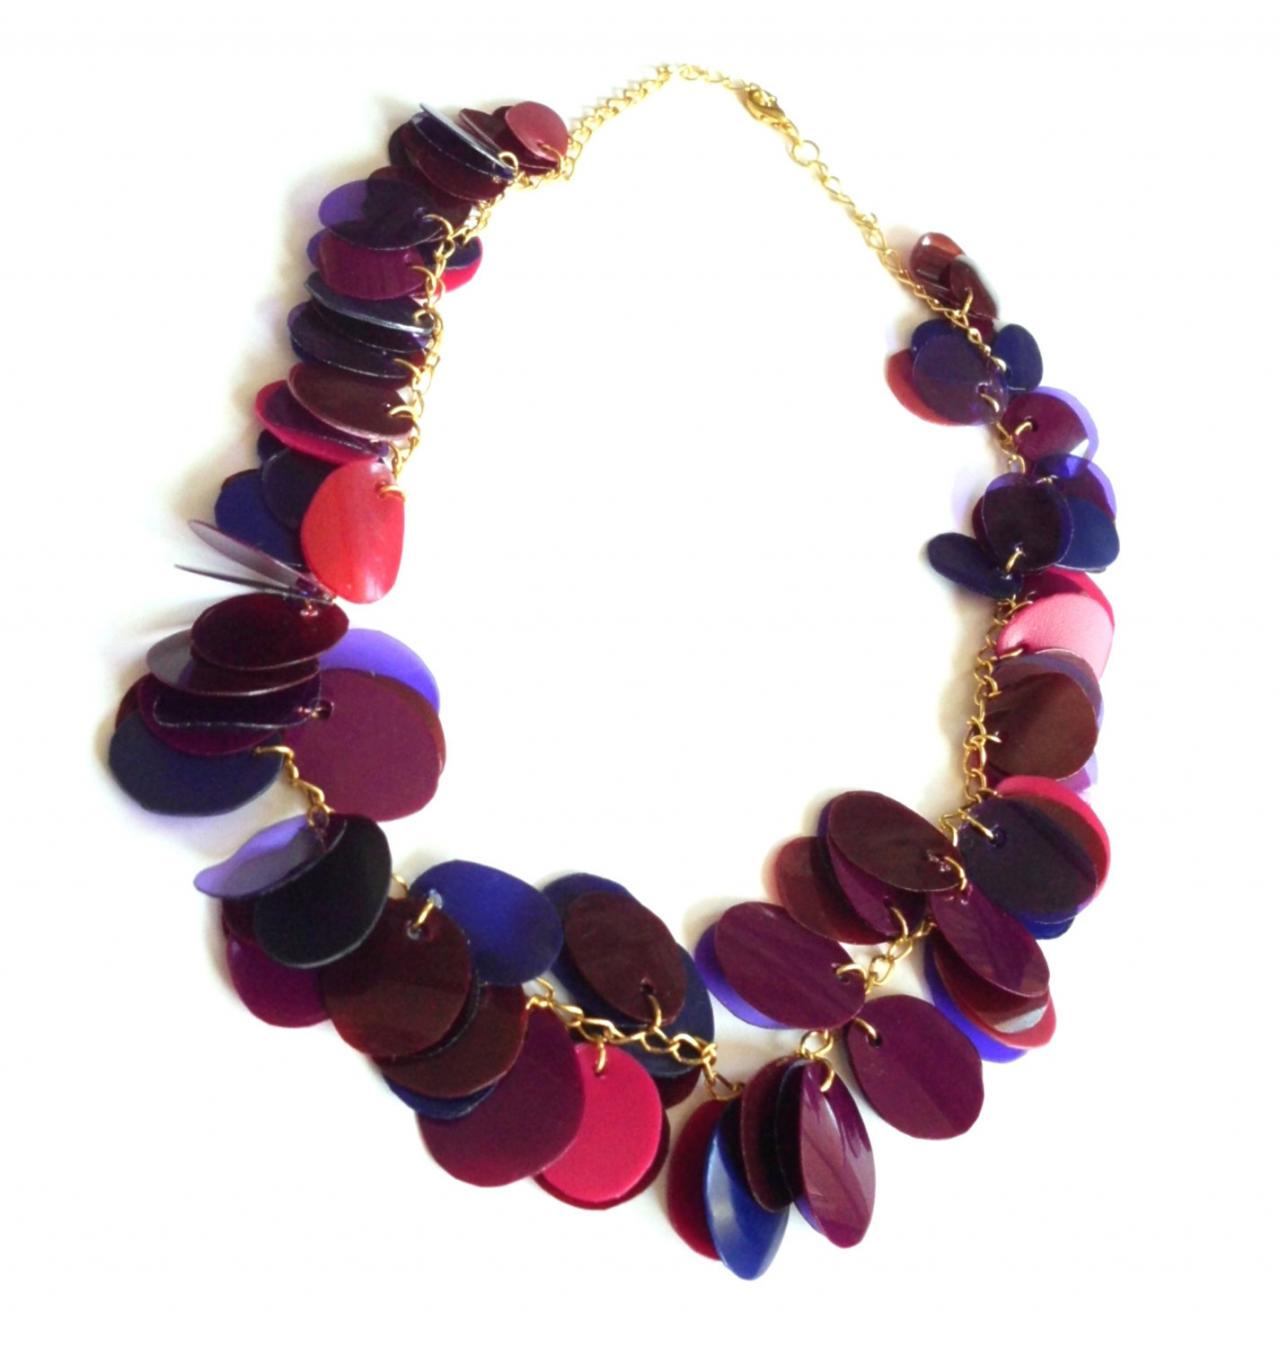 Statement Necklace Handmade Of Recycled Plastic Bottles In Red, Purple & Blue, Eco Friendly Upcycled Jewelry